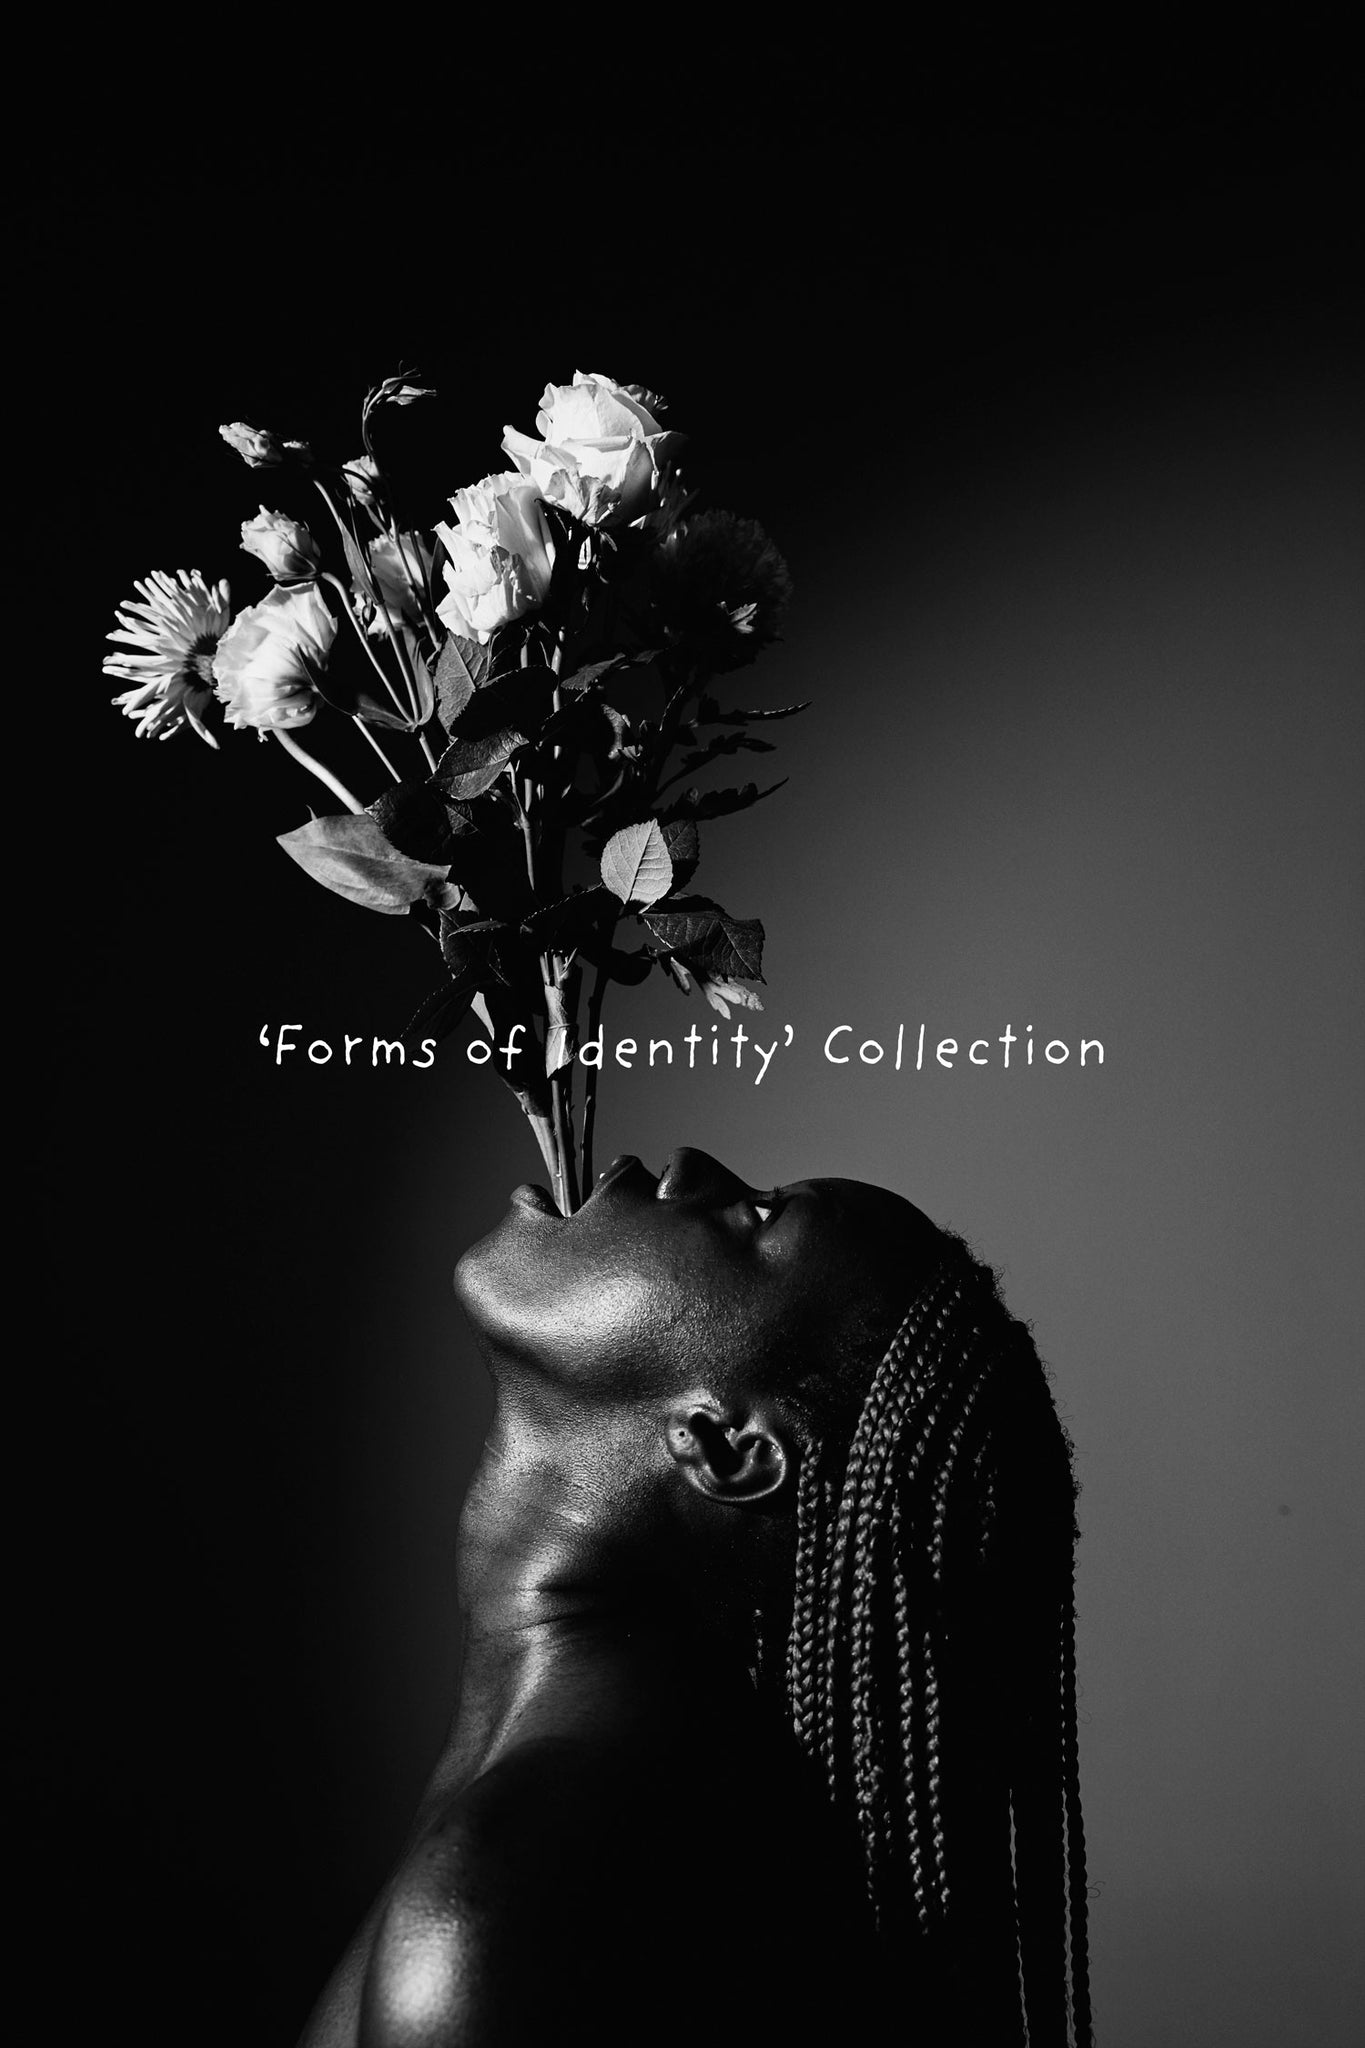 'Forms of Identity' Collection